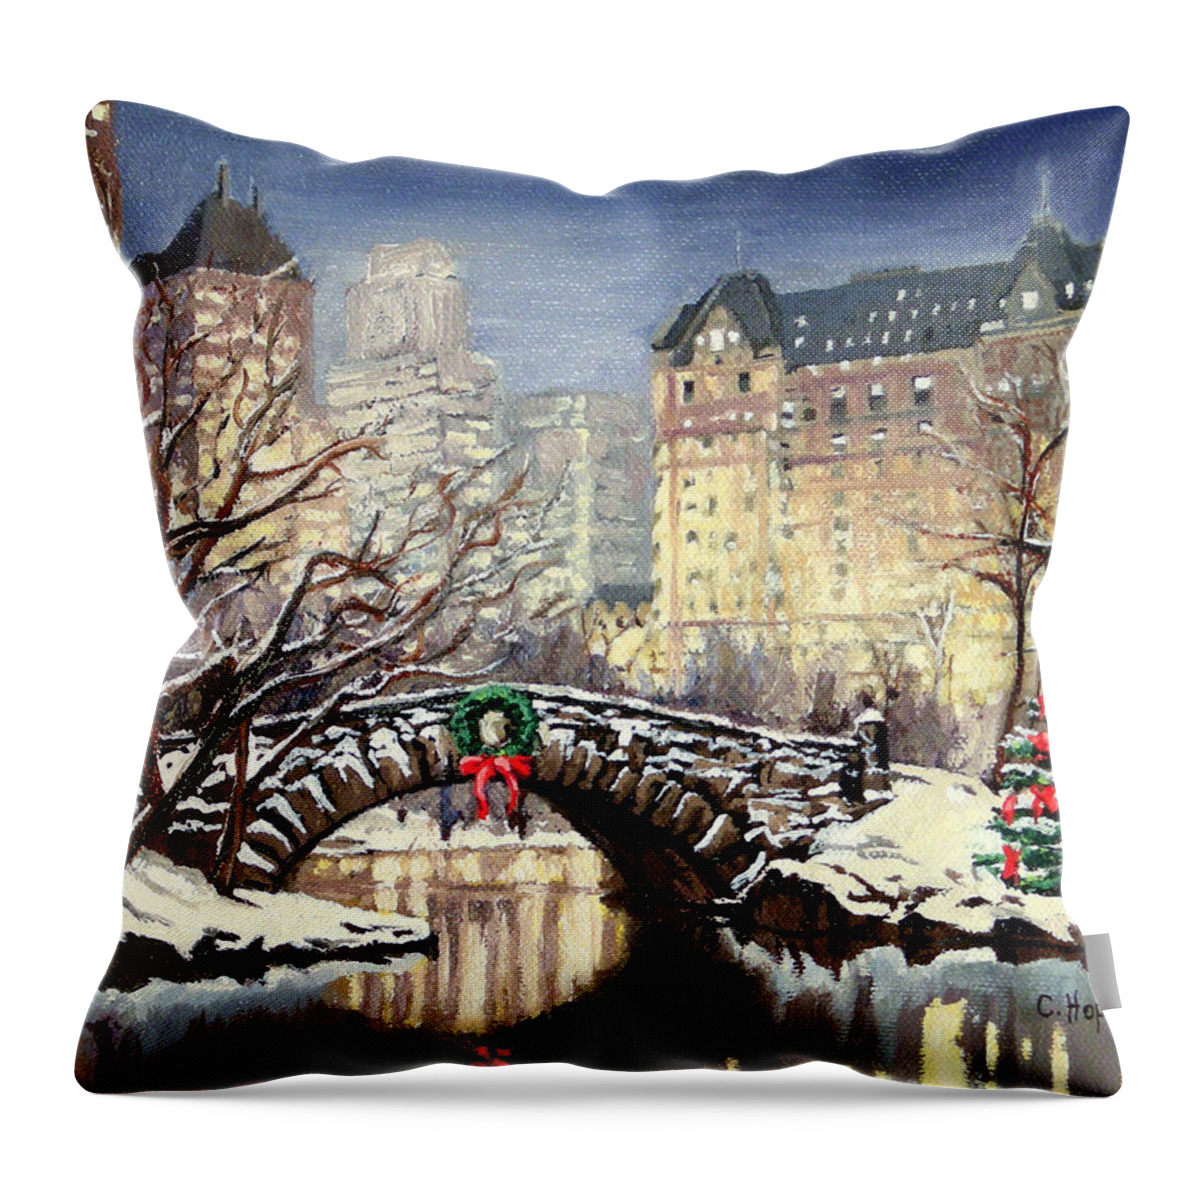 Christine Hopkins Throw Pillow featuring the painting Park Plaza Central Park - New York City by Christine Hopkins